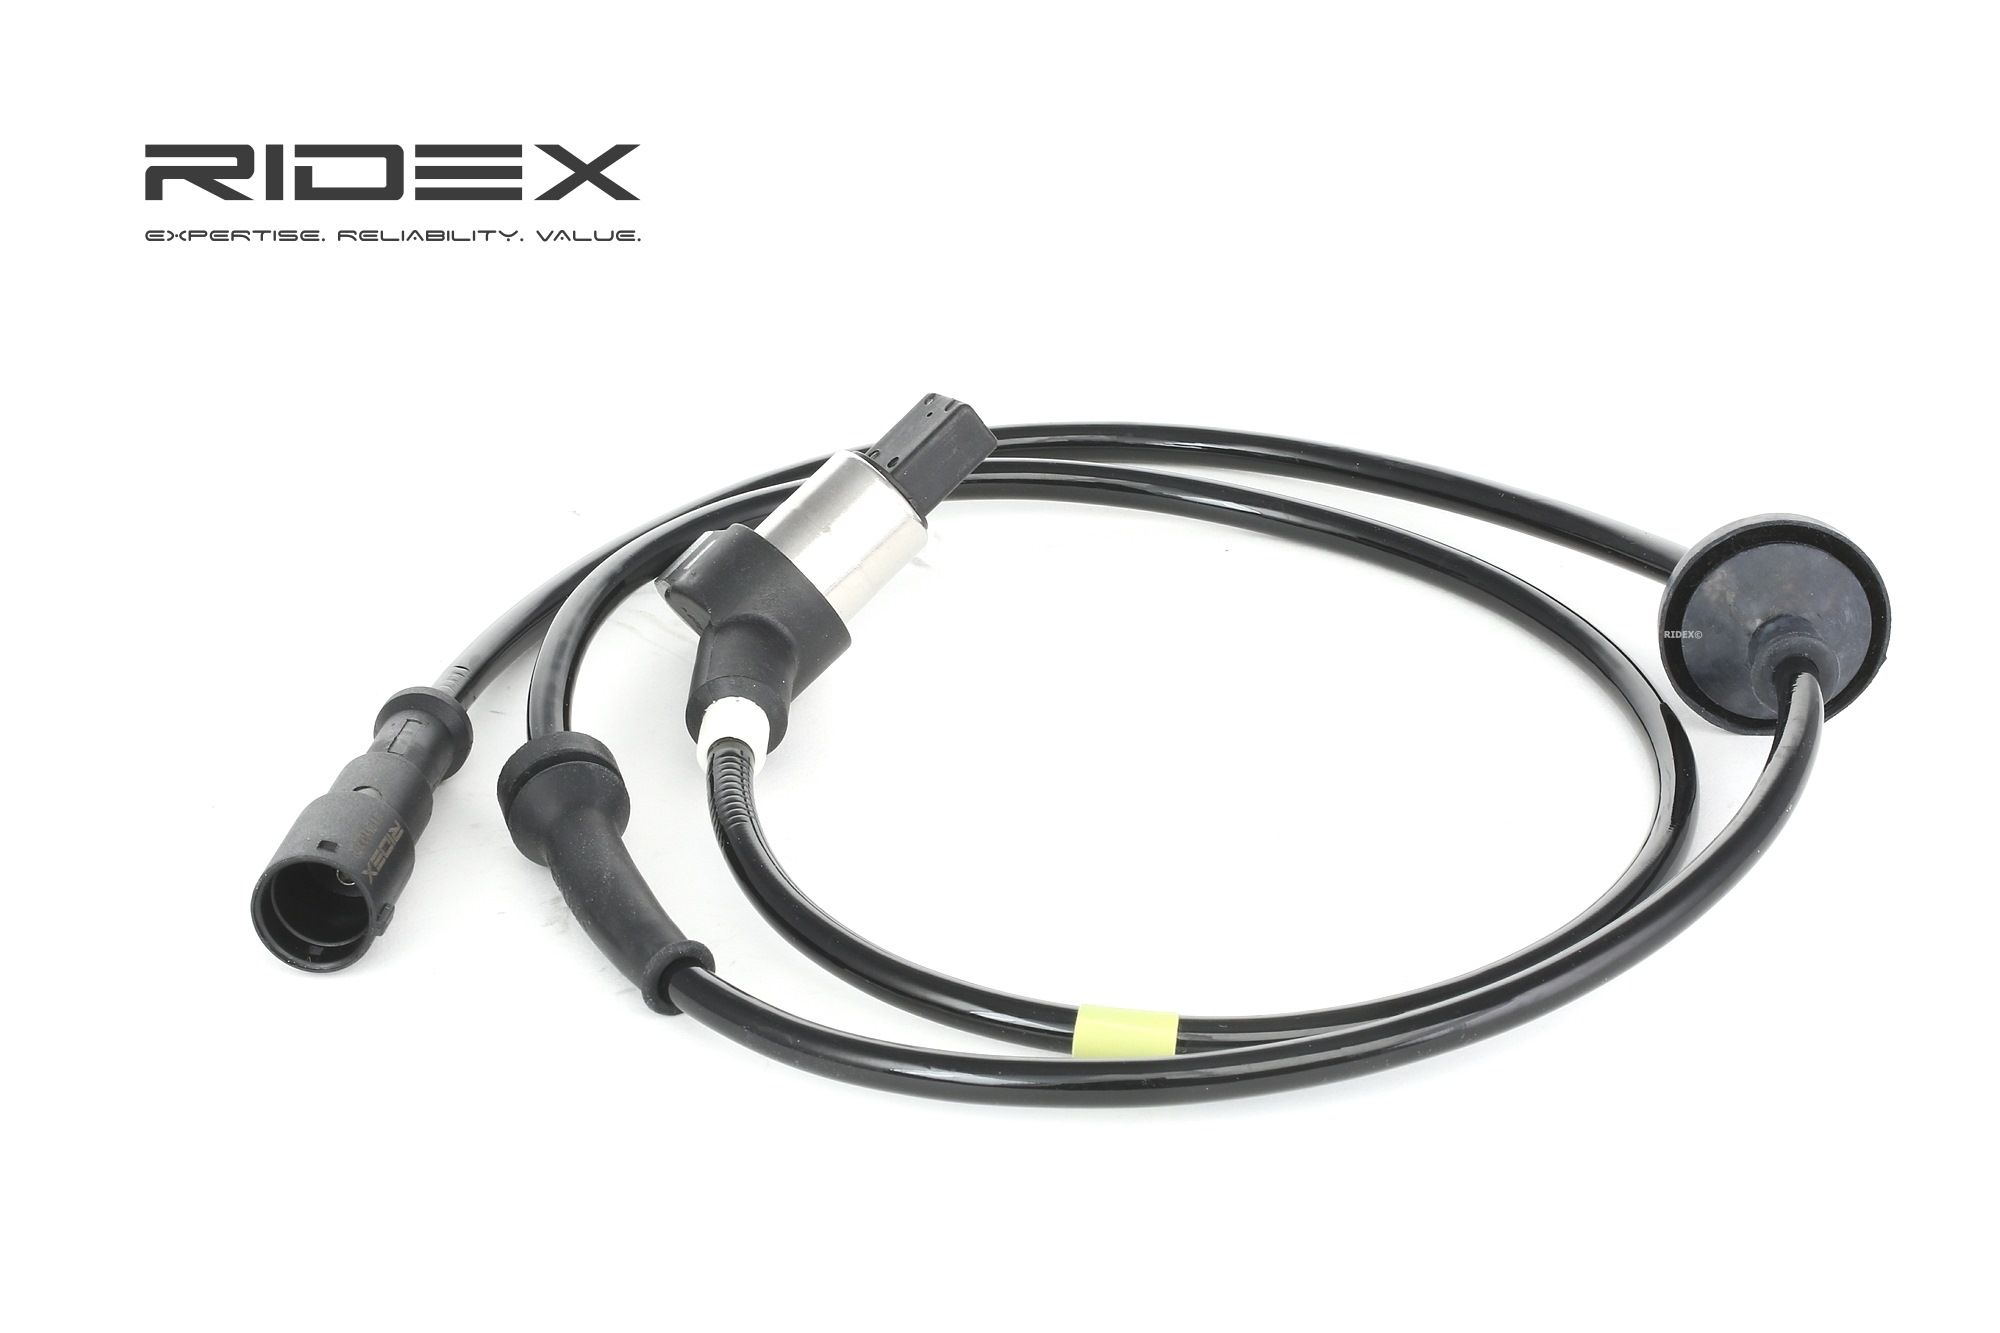 RIDEX 412W0028 ABS sensor Rear Axle both sides, with cable, for vehicles with ABS, Inductive Sensor, 2-pin connector, 1100 Ohm, 1010mm, 34mm, 12V, black